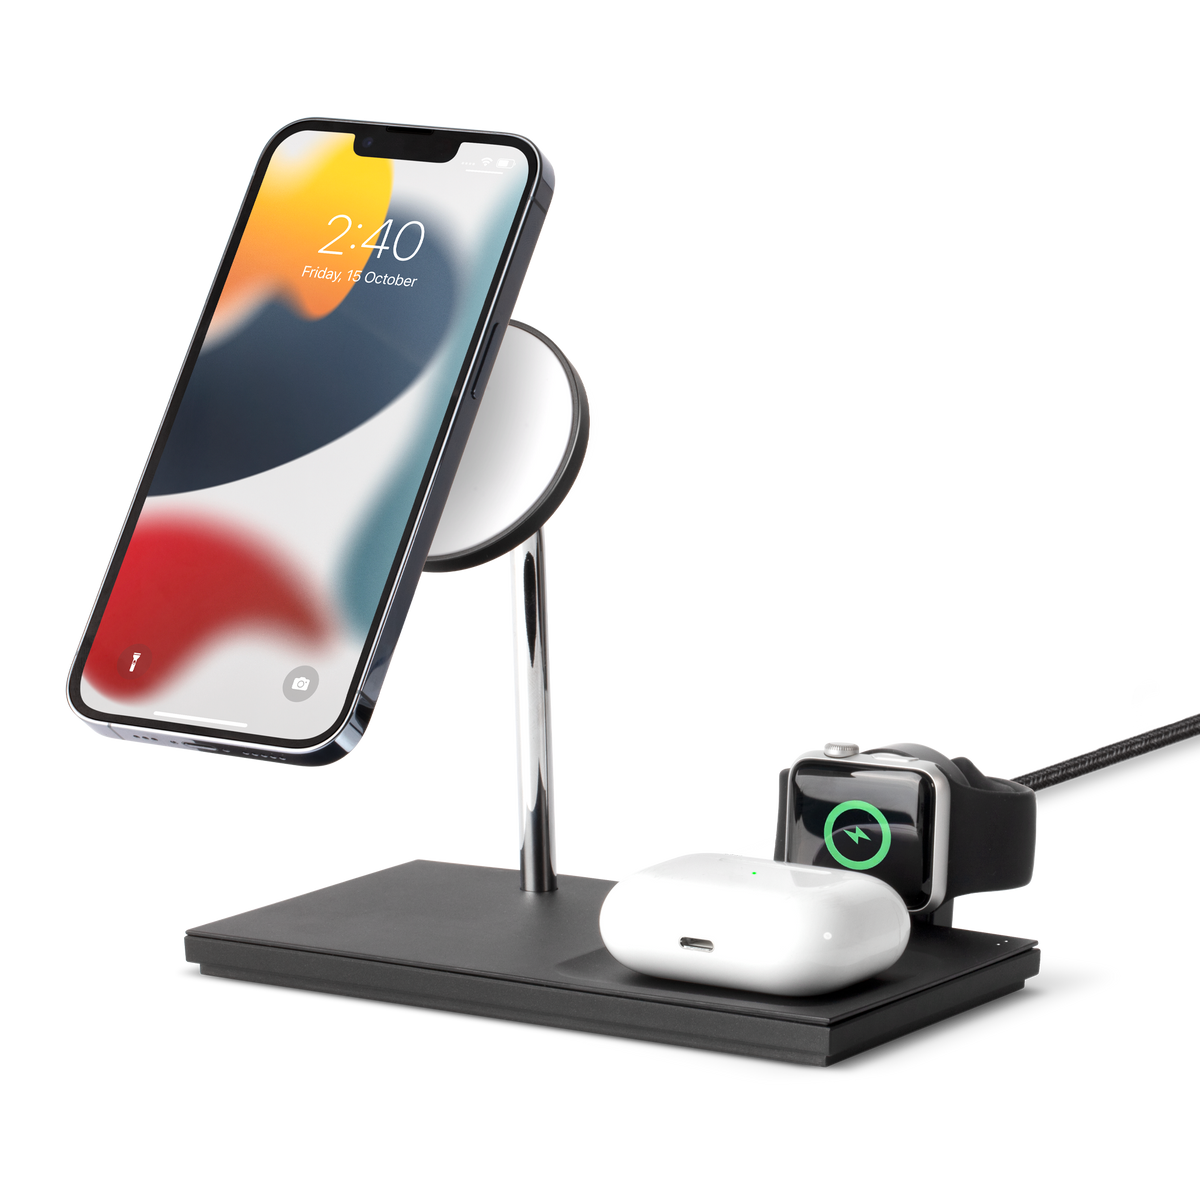 Belkin BoostCharge PRO 3-in-1 Wireless Charger with MagSafe for iPhone 13,  12 + Apple Watch + AirPods (Magnetically Charges iPhone 13 and 12 Models up